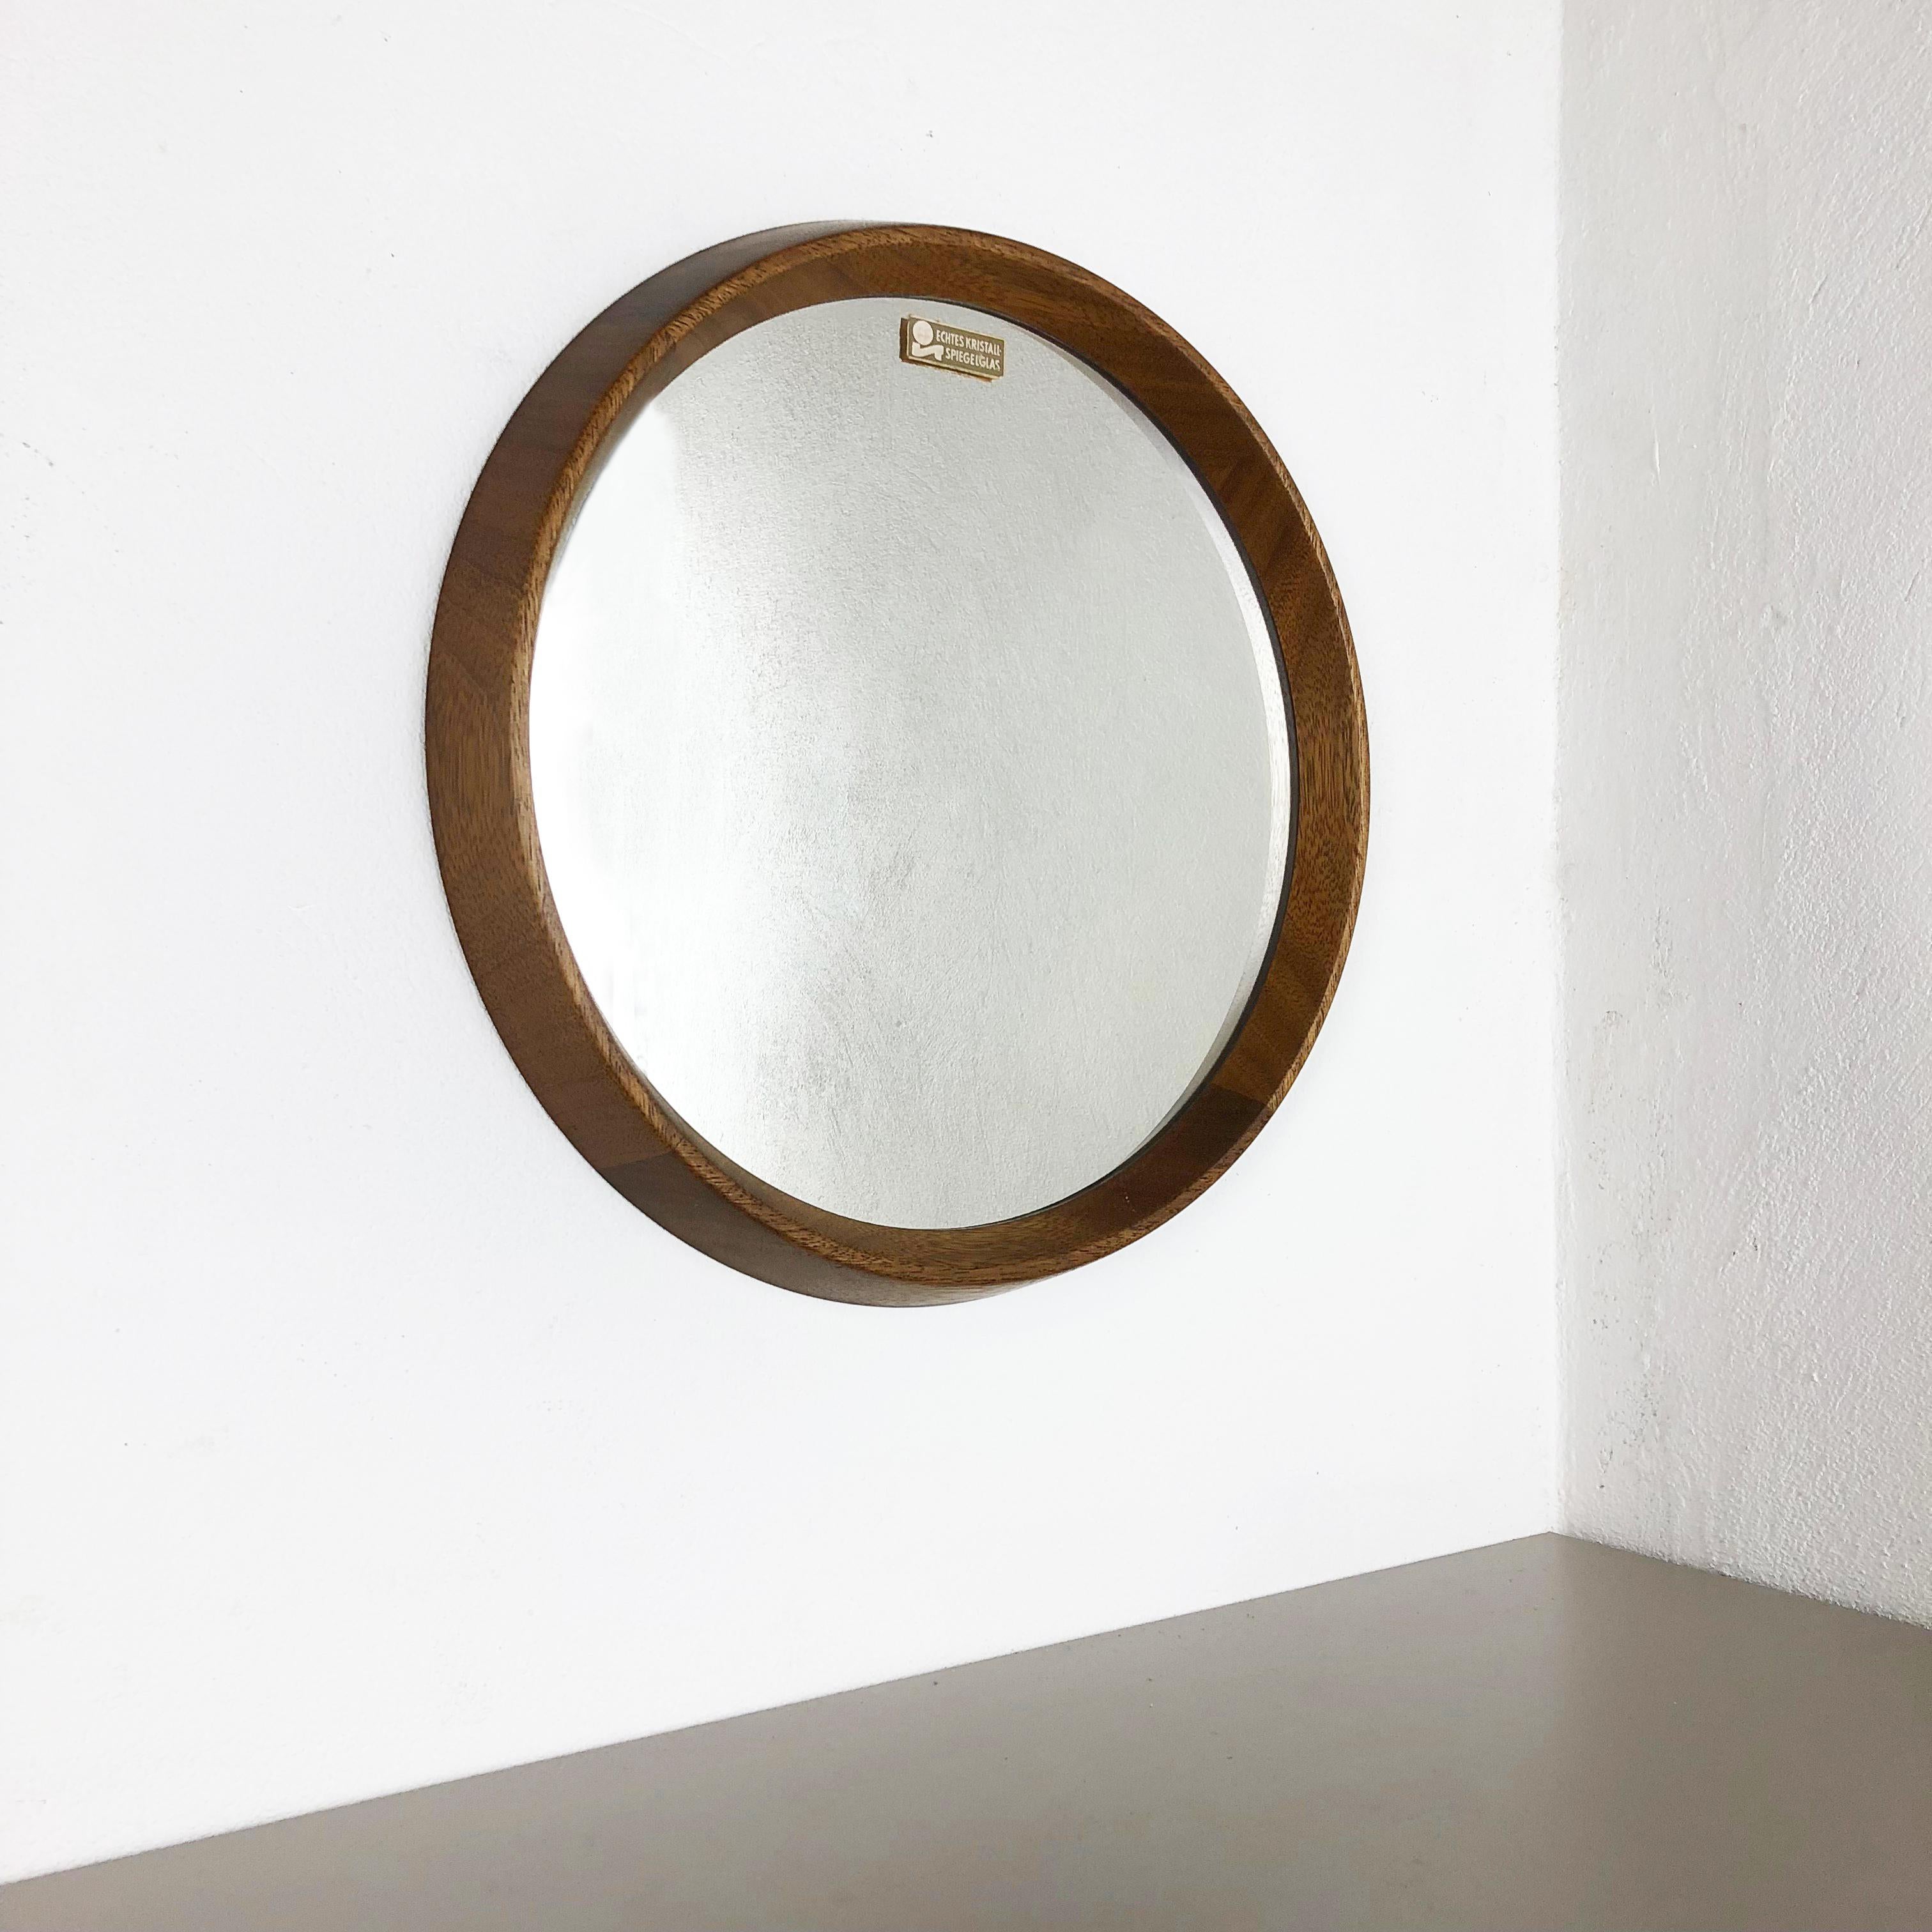 Article:

Solid wood mirror new old stock!


Origin:

Germany


Age:

1960s


This original vintage solid wood mirror was produced in the 1960s in Germany. It is new old stock, it was stored in a shop since the 1960s, where such